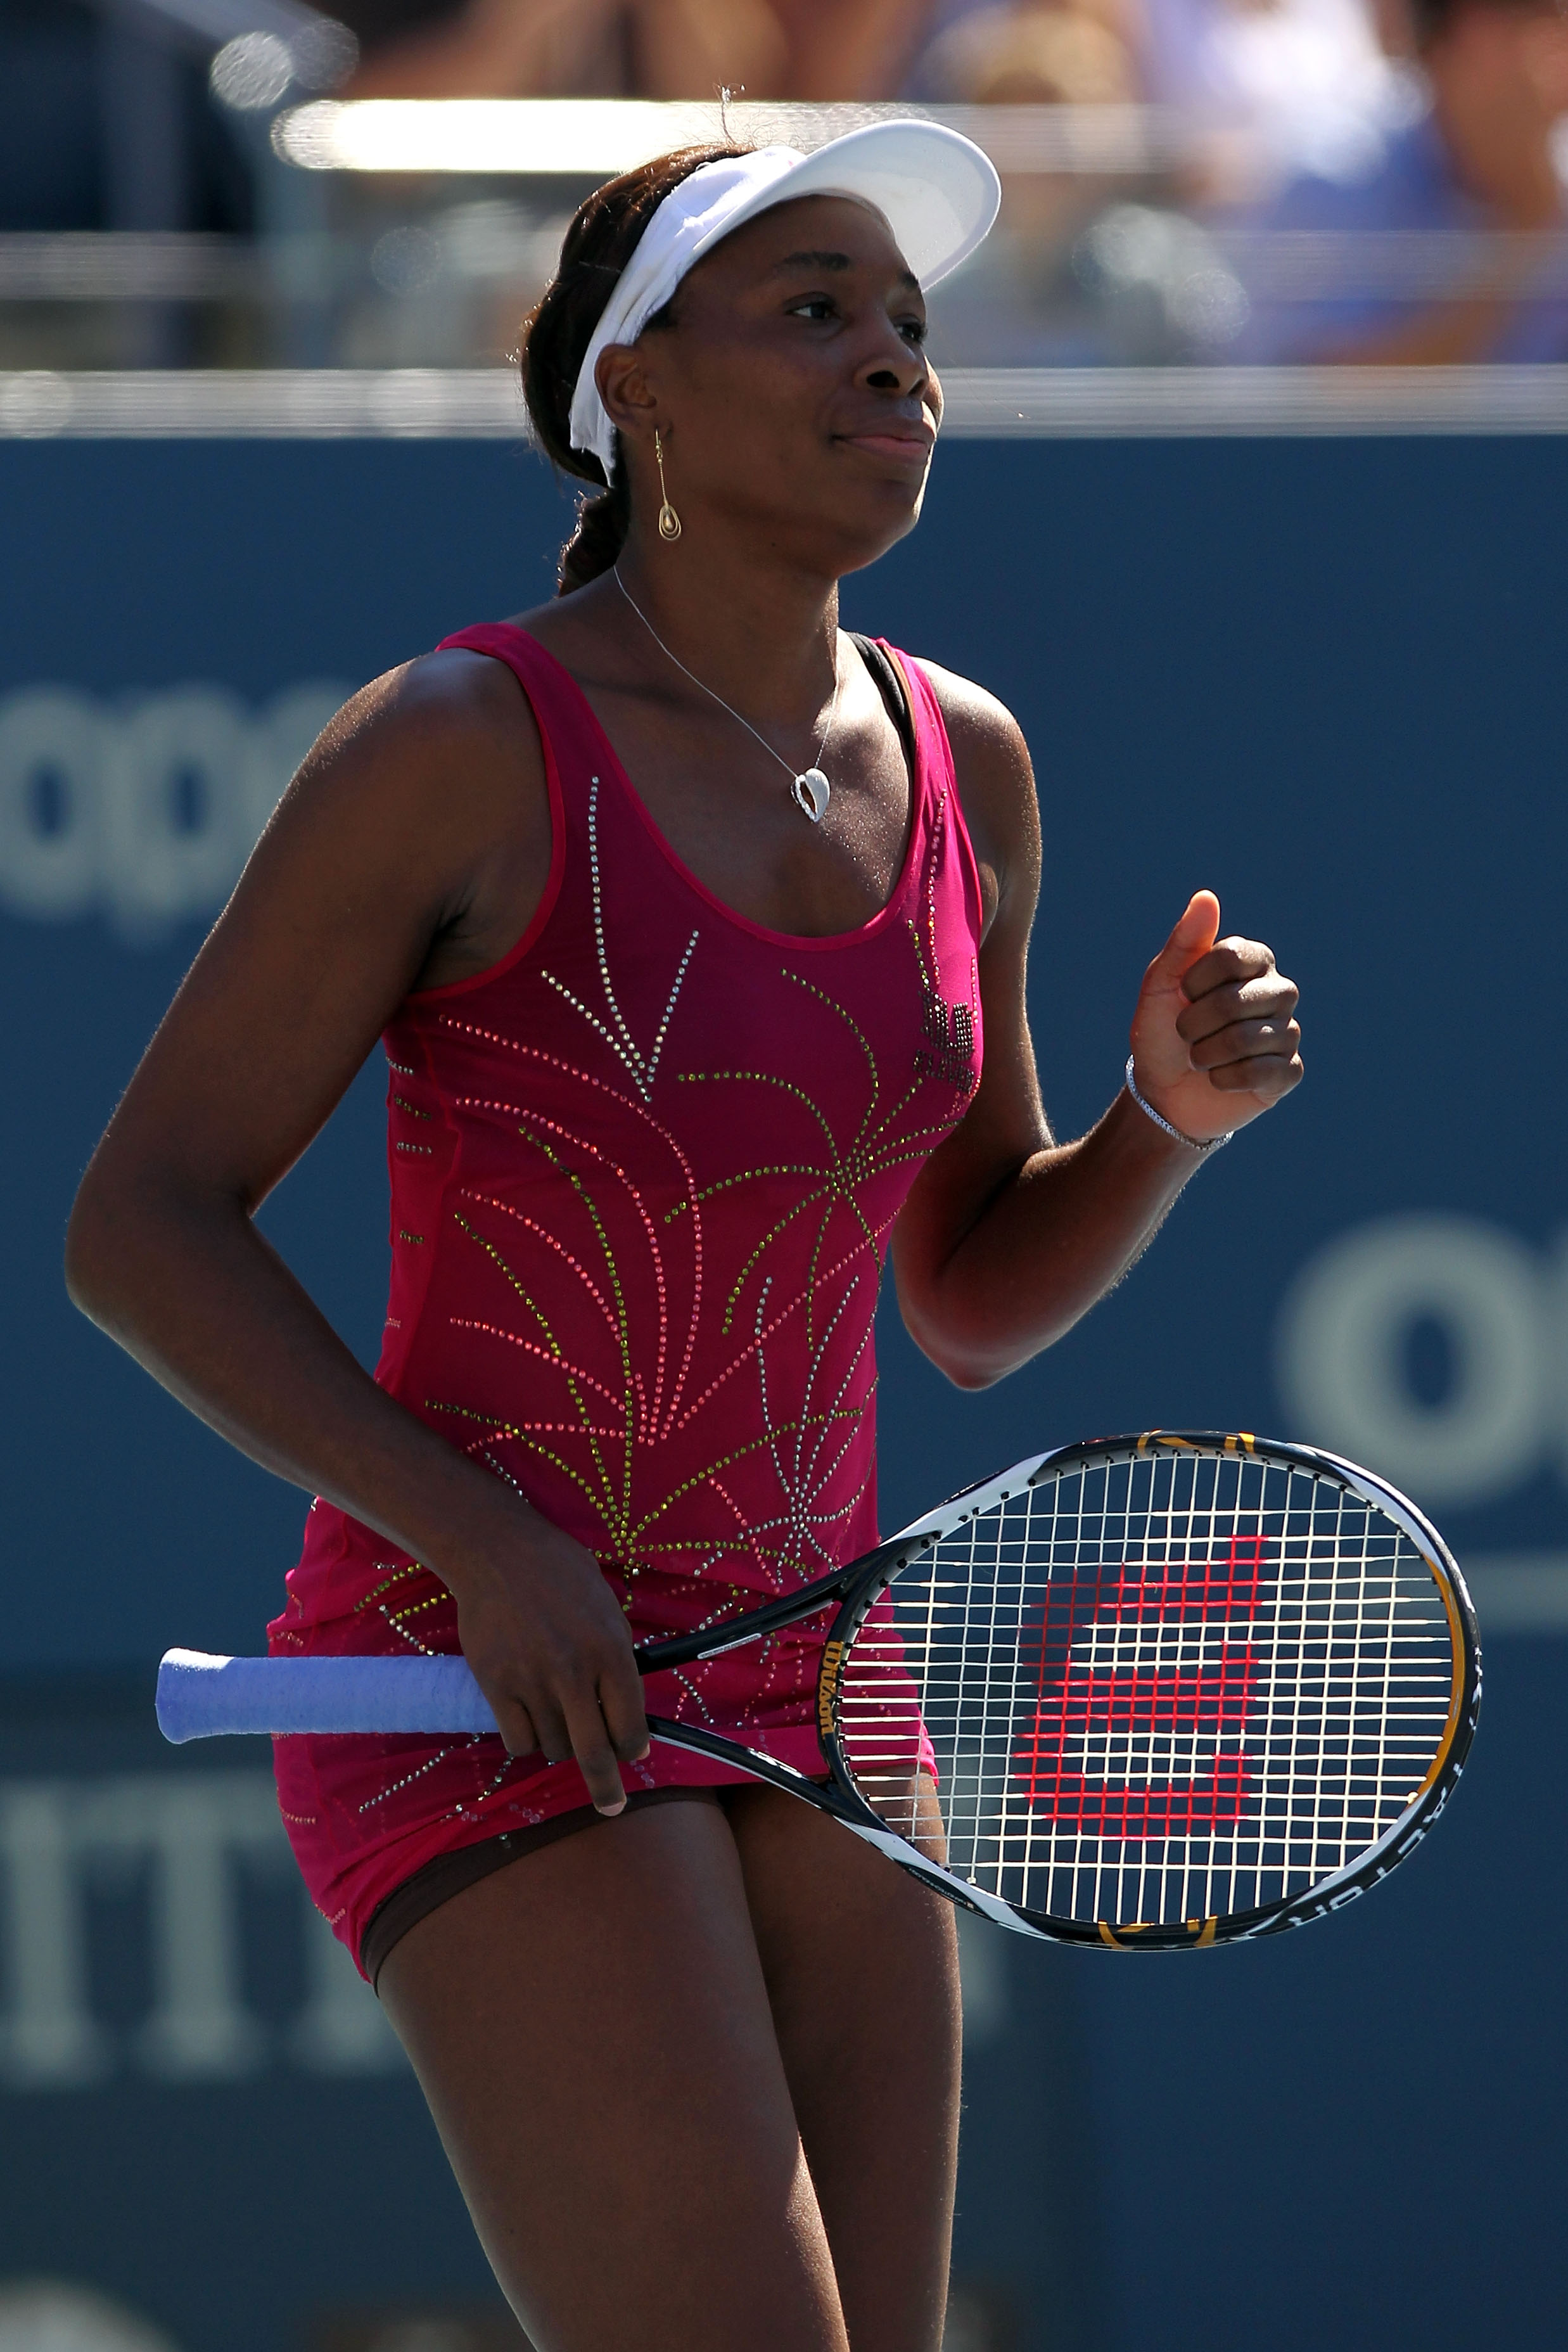 NEW YORK - SEPTEMBER 05:  Venus Williams of the United States celebrates winning match point against Shahar Peer of Israel during her women's singles match on day seven of the 2010 U.S. Open at the USTA Billie Jean King National Tennis Center on September